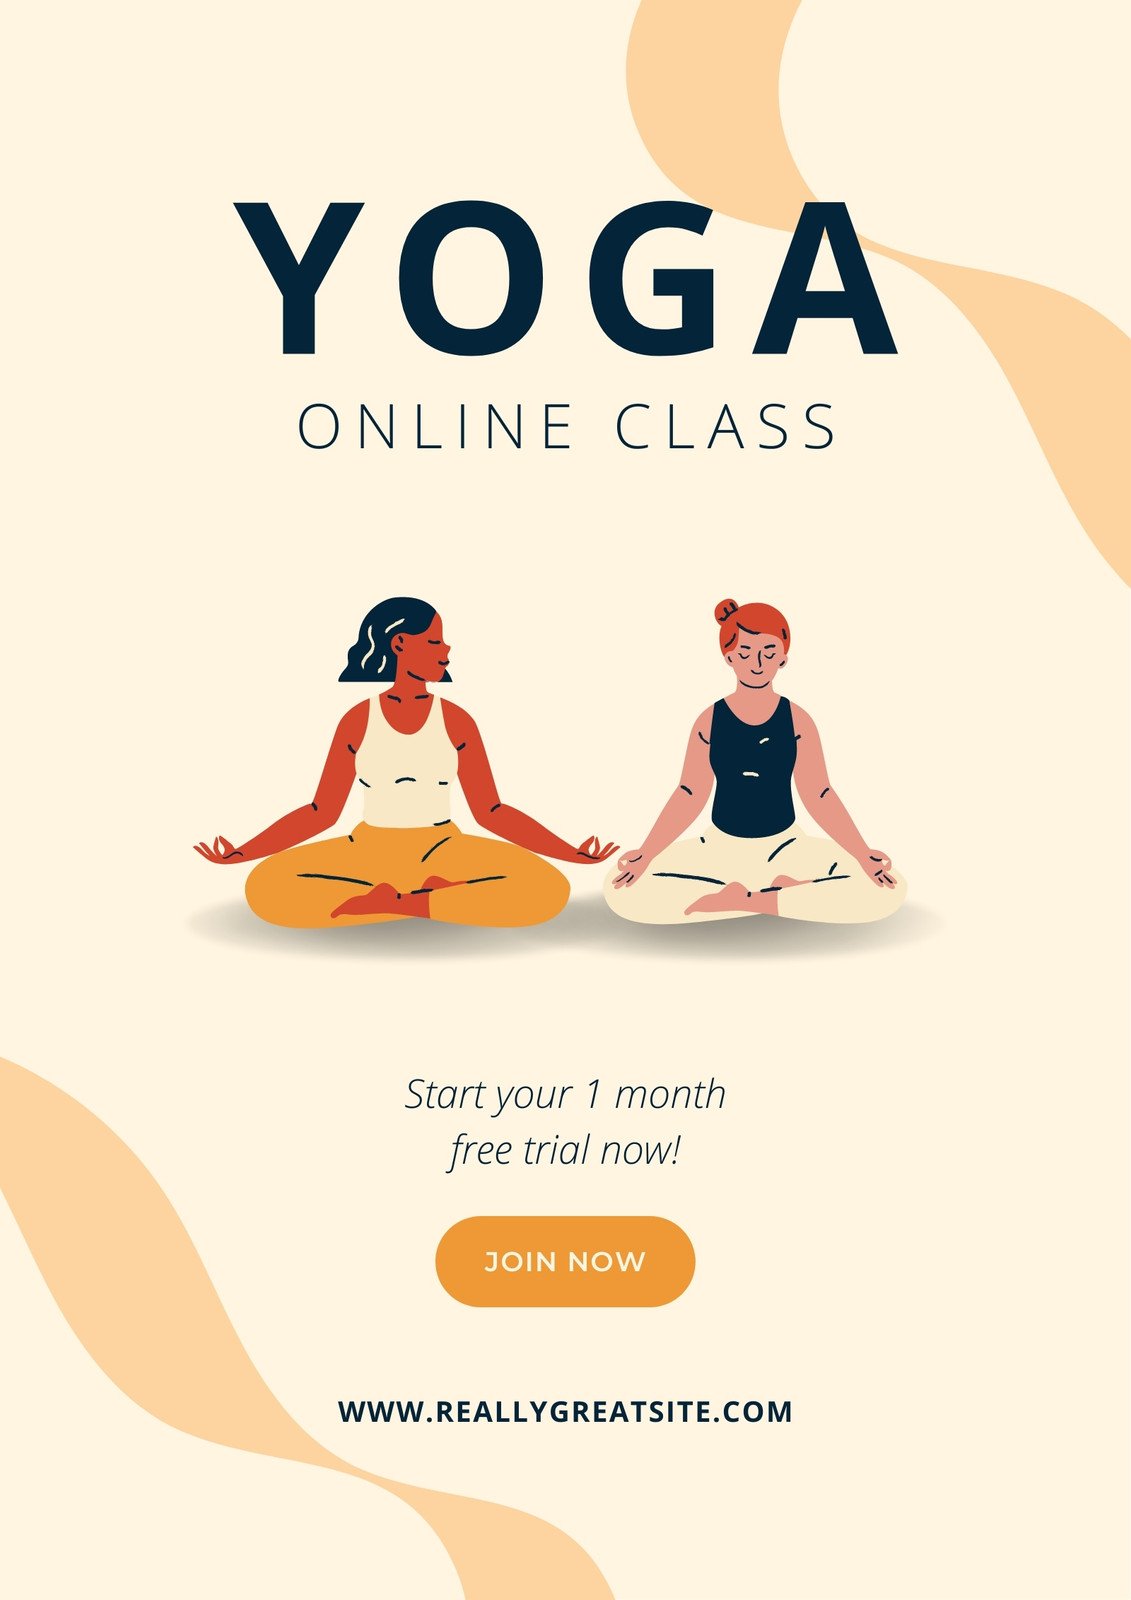 Now offering free online yoga & fitness classes